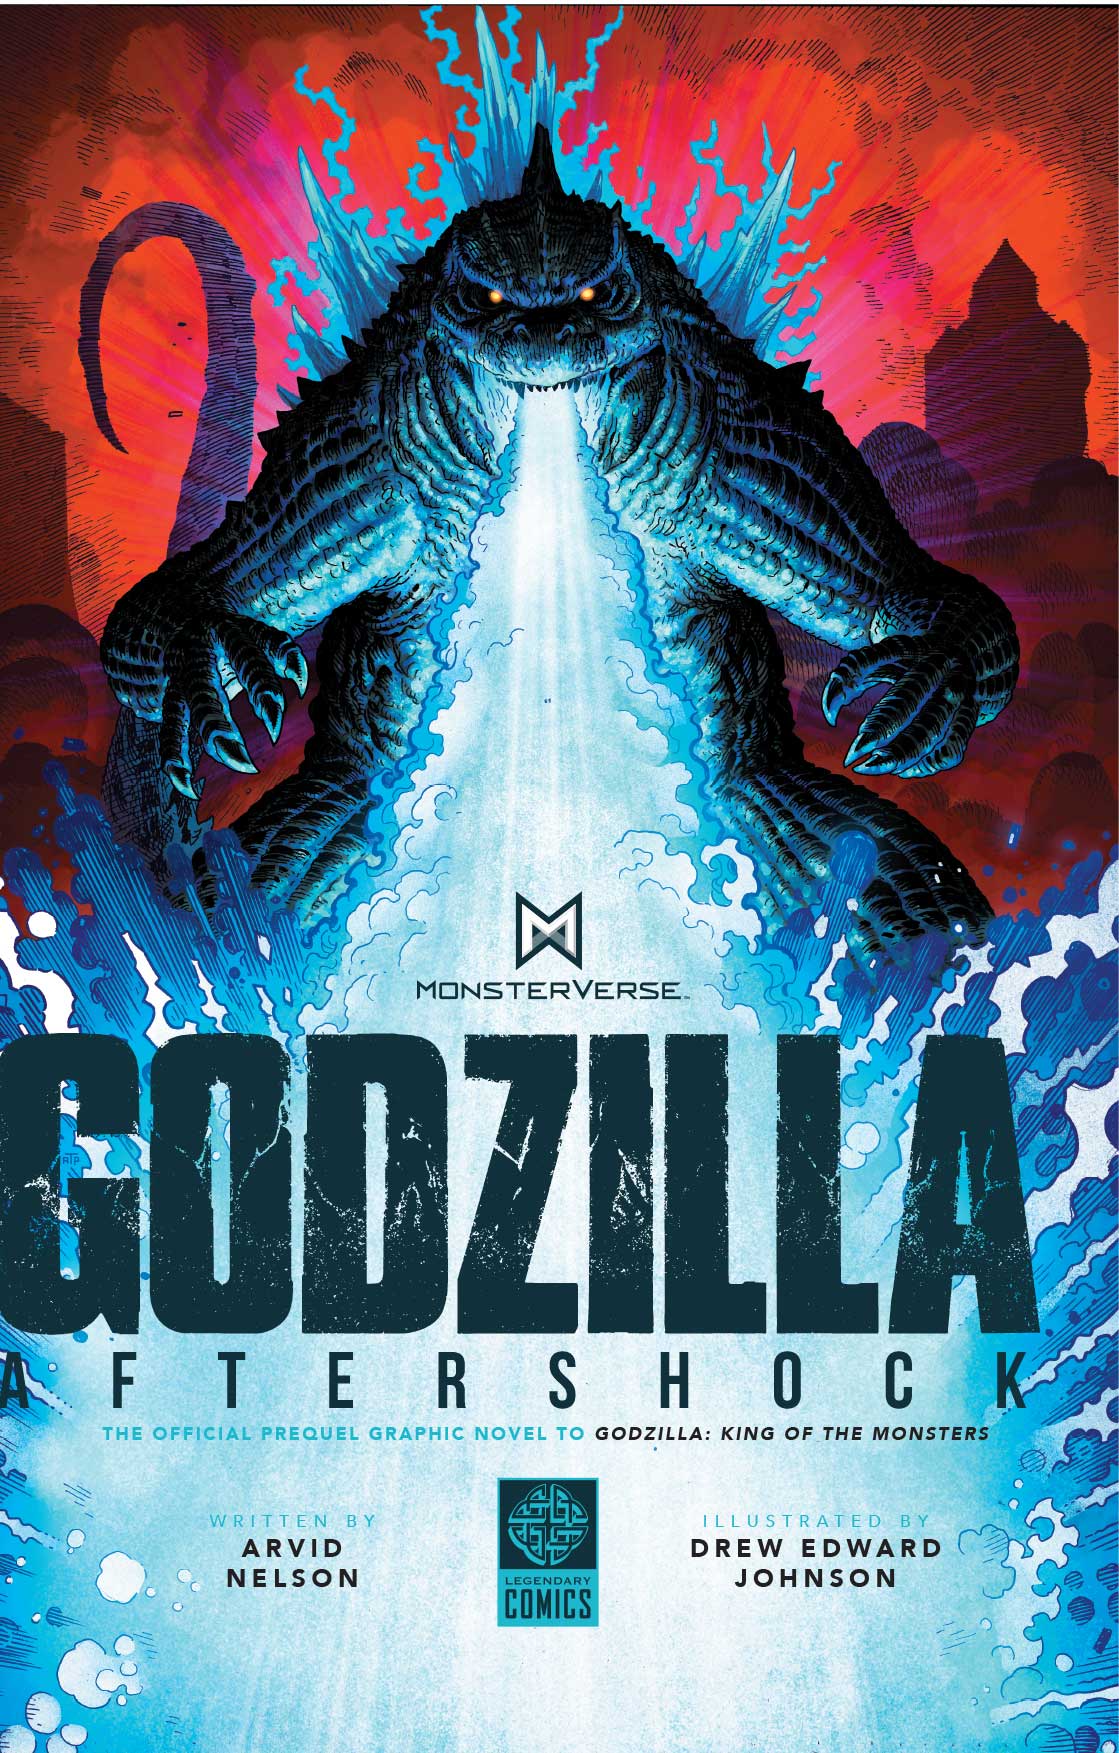 Godzilla Aftershock arrives in comic stores today — Major Spoilers